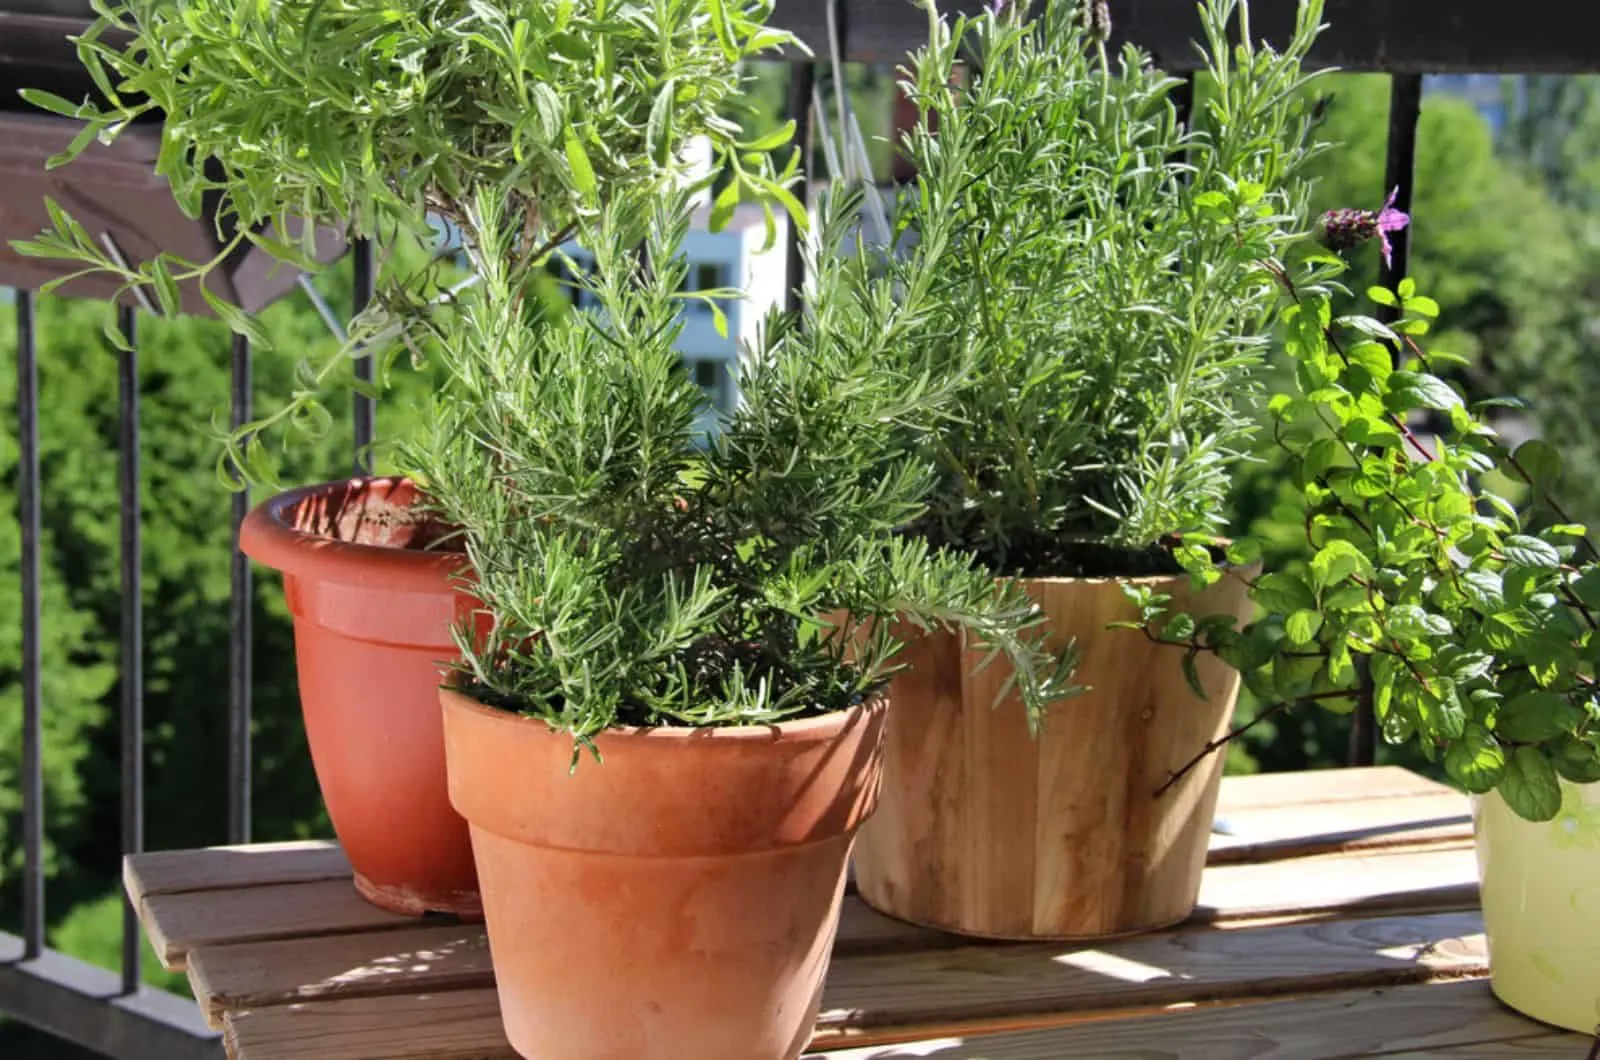 Rosemary, mint, lavender and other herbs in the pot